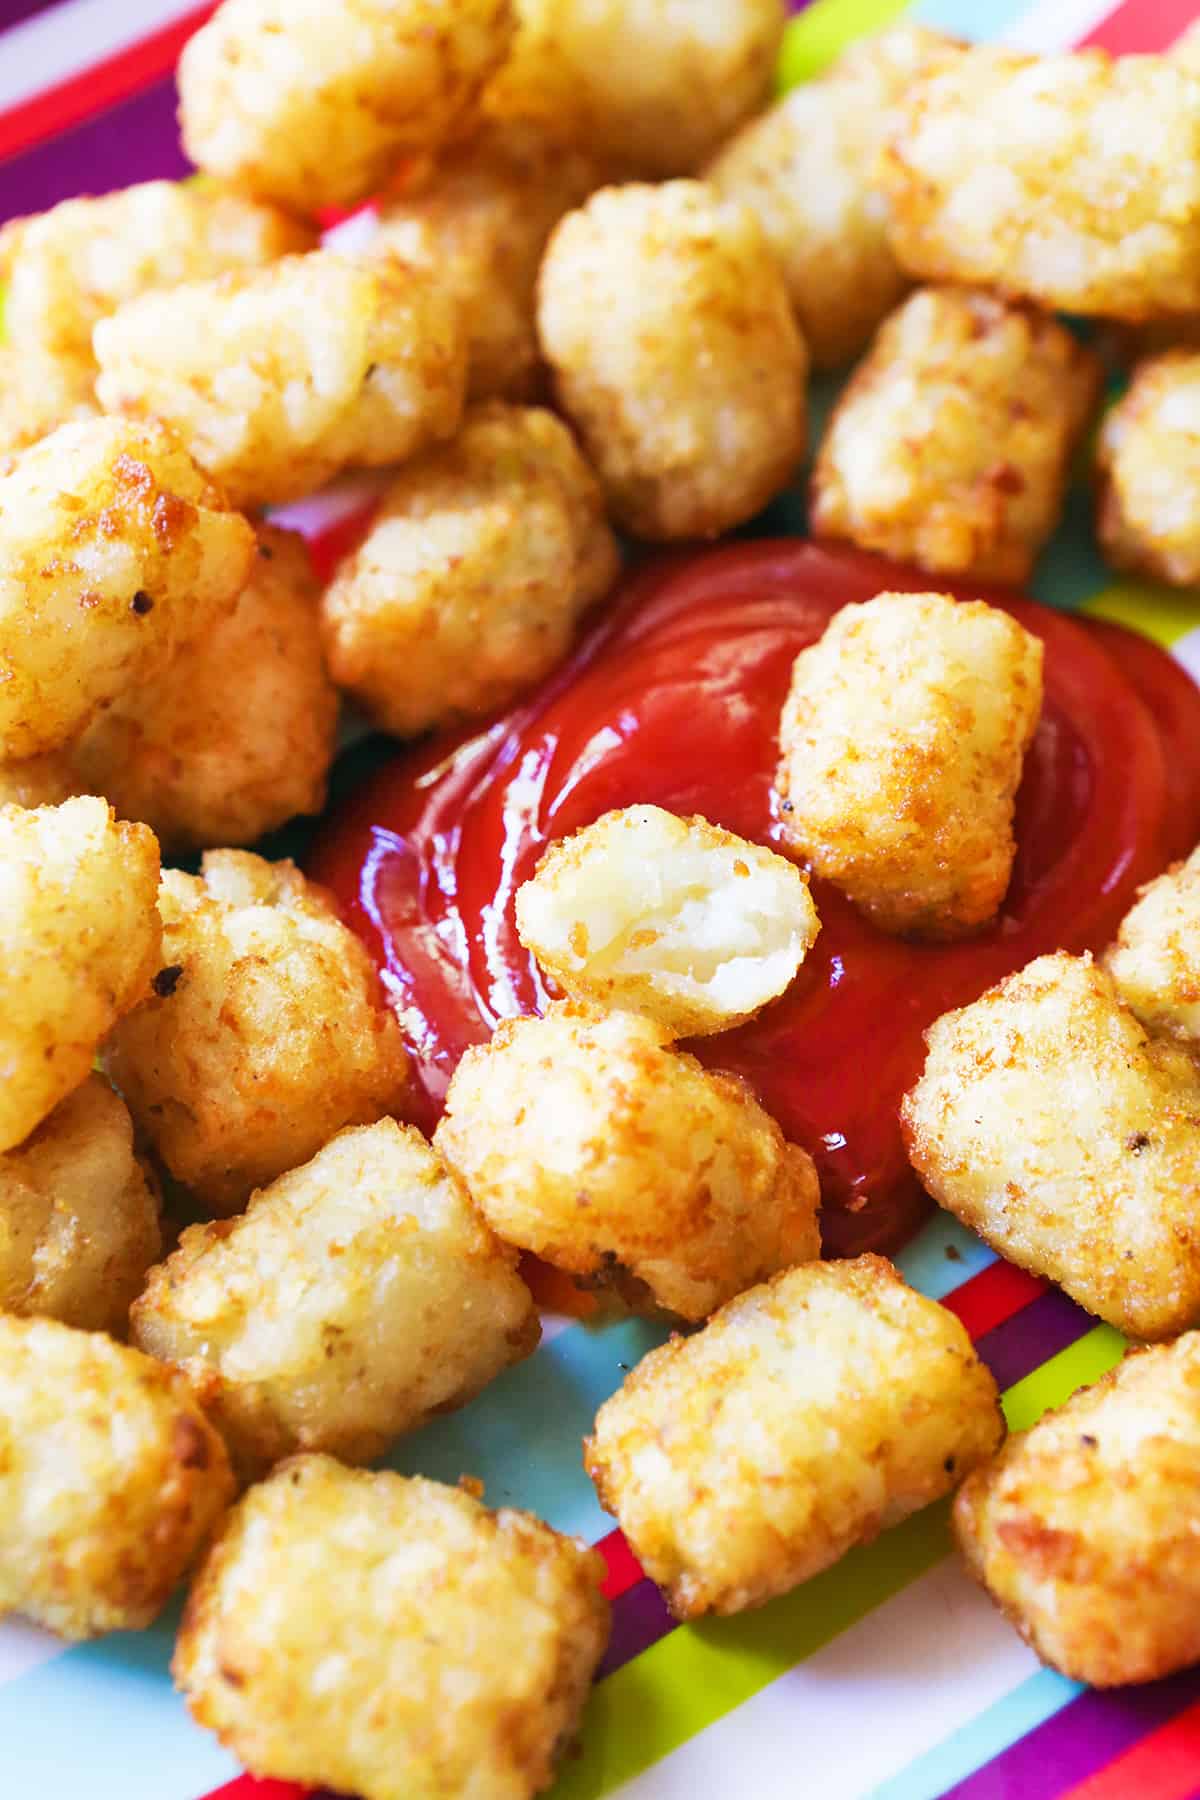 Ketchup surrounded by tater tots, with a bite taken out of one in the middle.